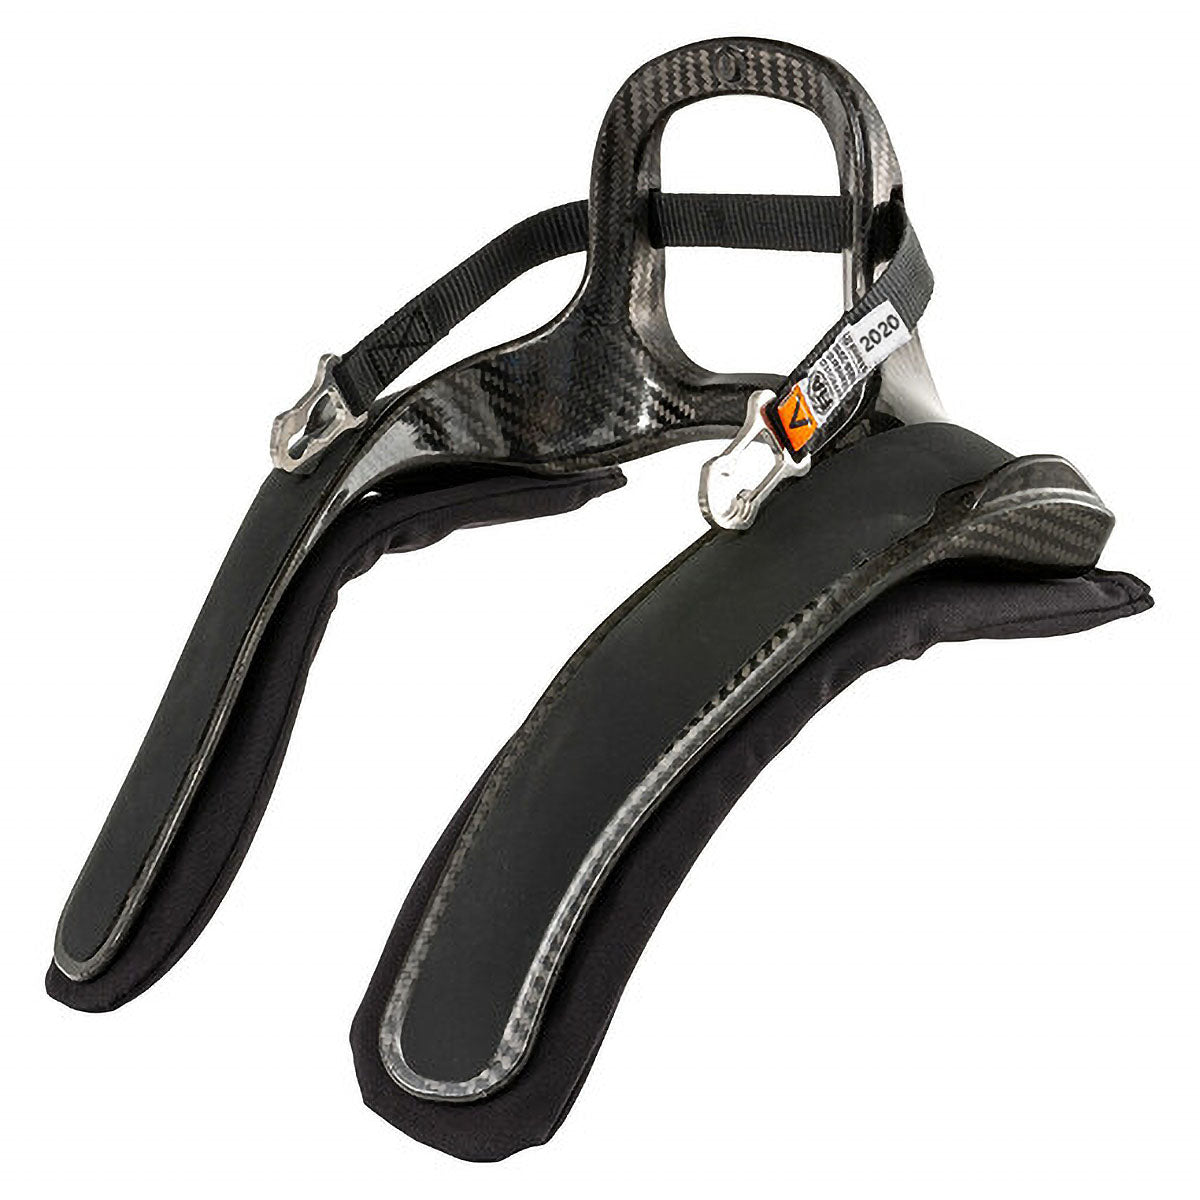 Stand21 Featherlite Head And Neck Restraint 30 degree